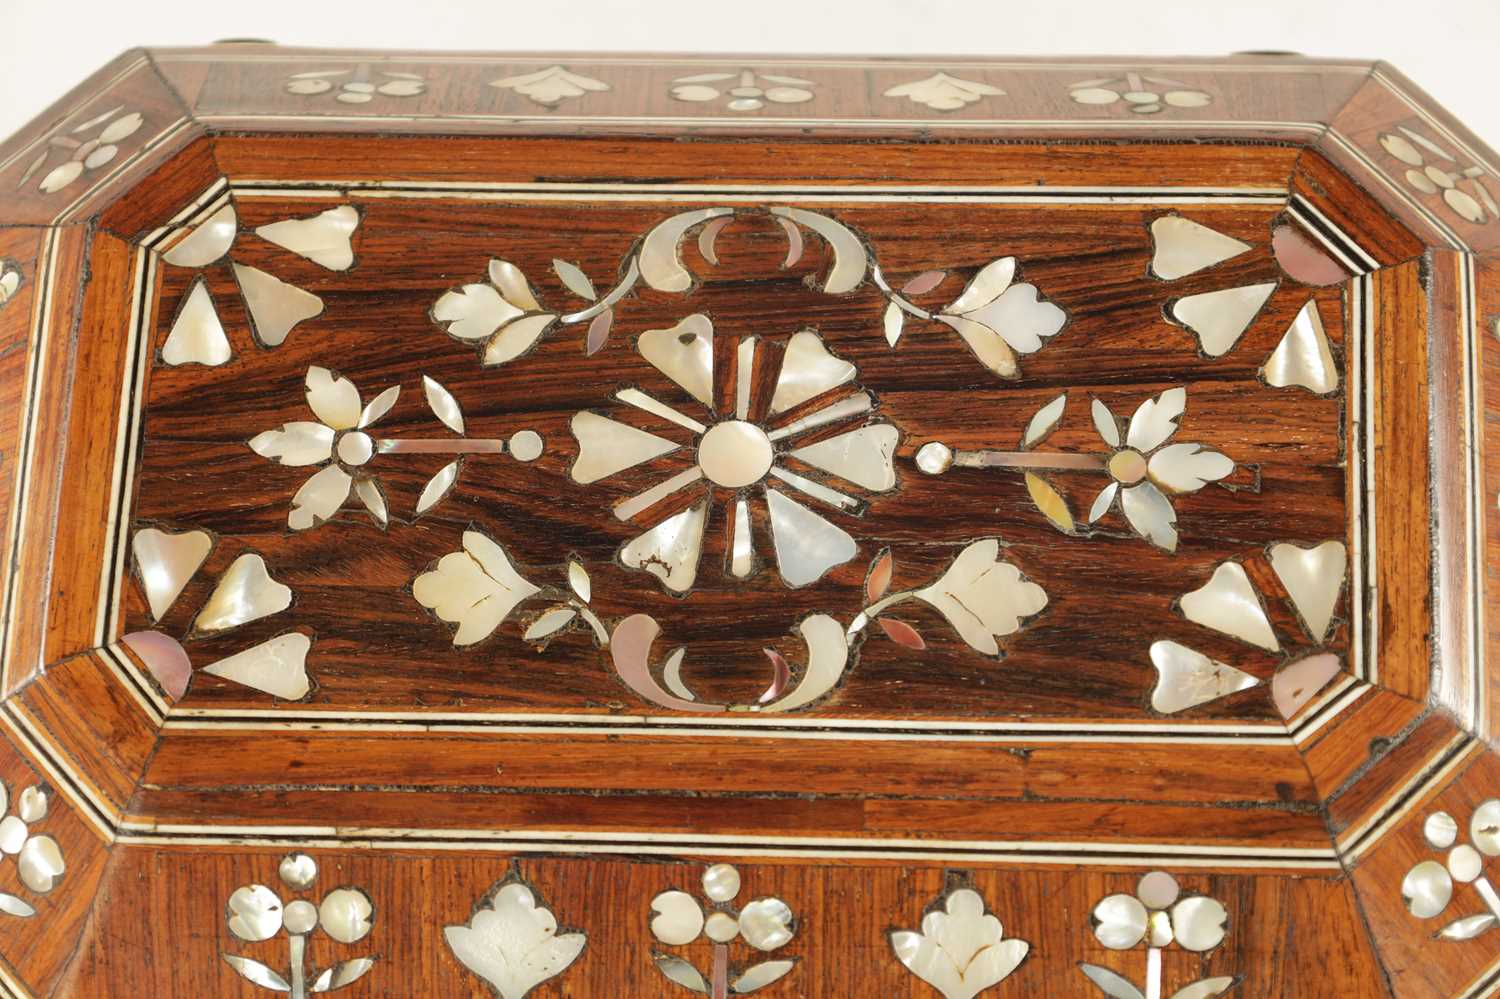 AN EARLY 18TH CENTURY SOUTH AMERICAN MOTHER OF PEARL INLAID BOX - Image 3 of 9